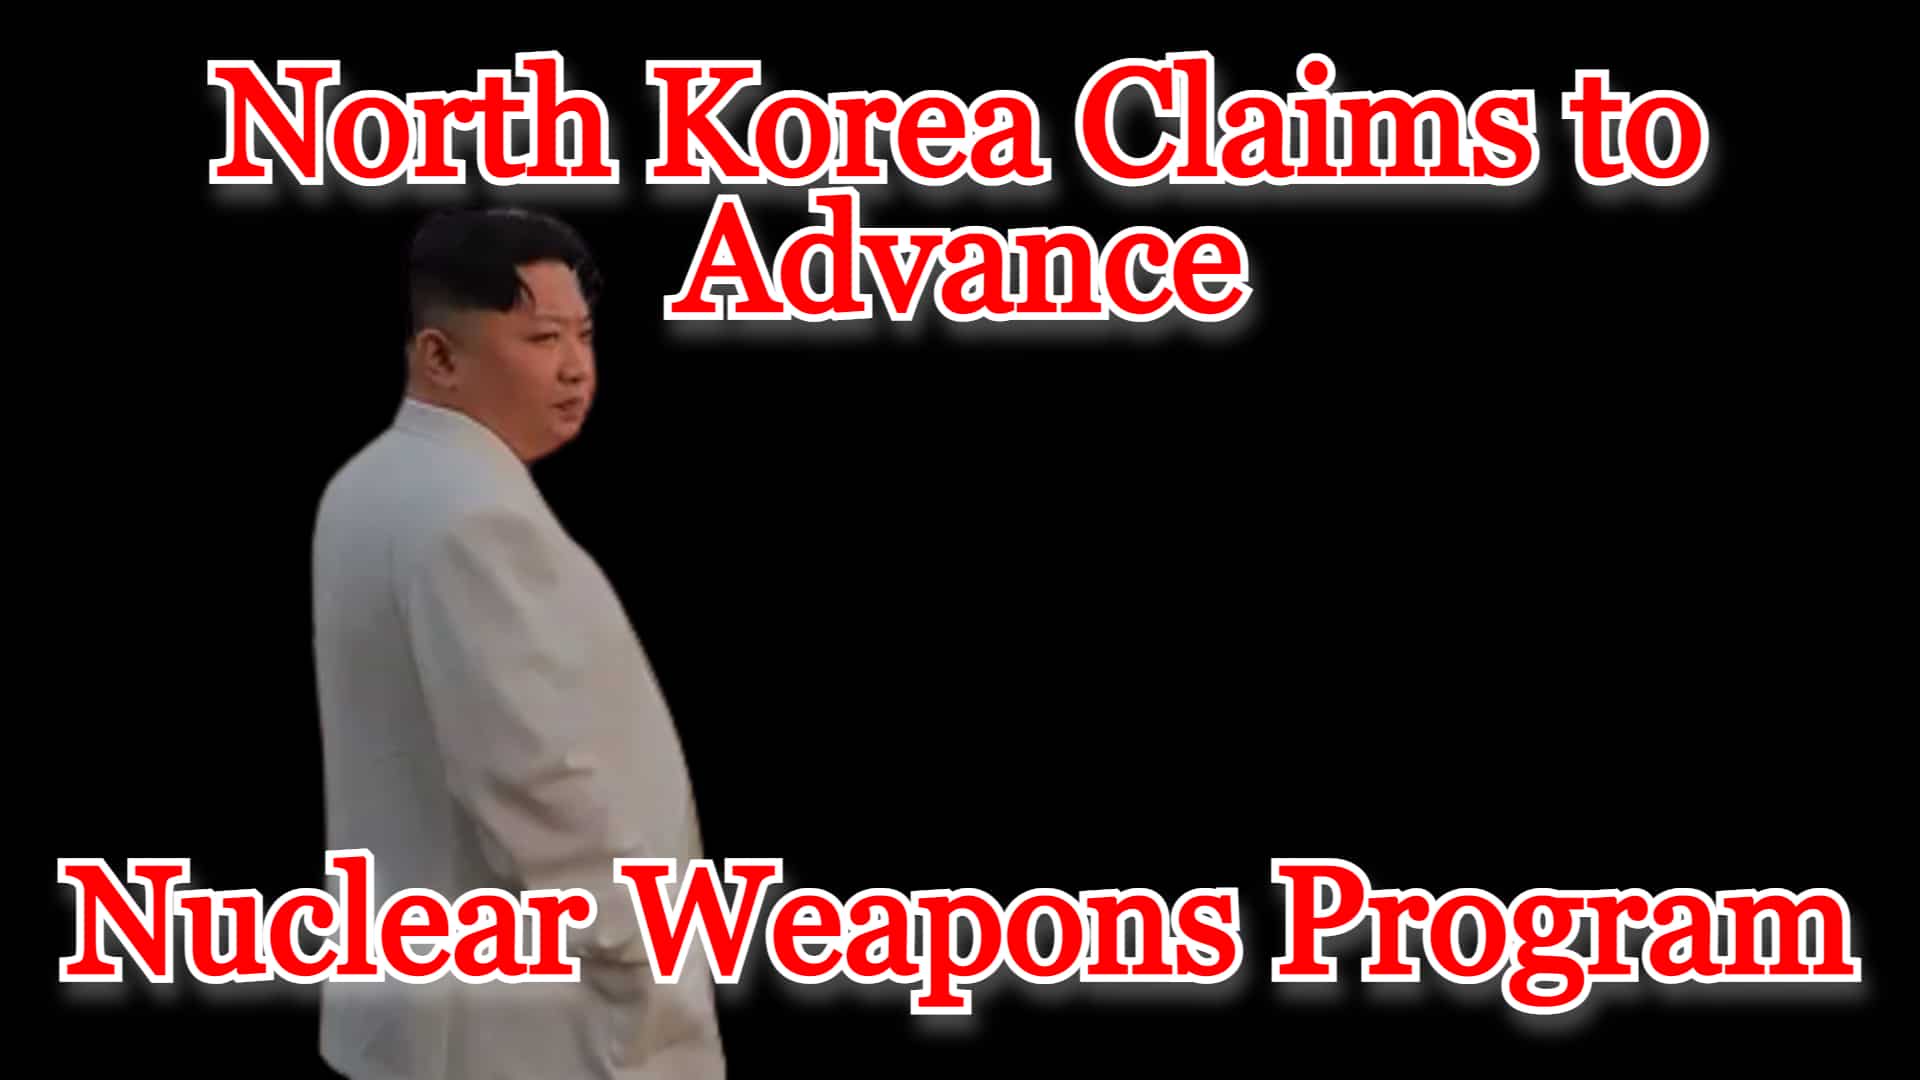 COI #335: North Korea Claims to Advance Nuclear Weapons Program